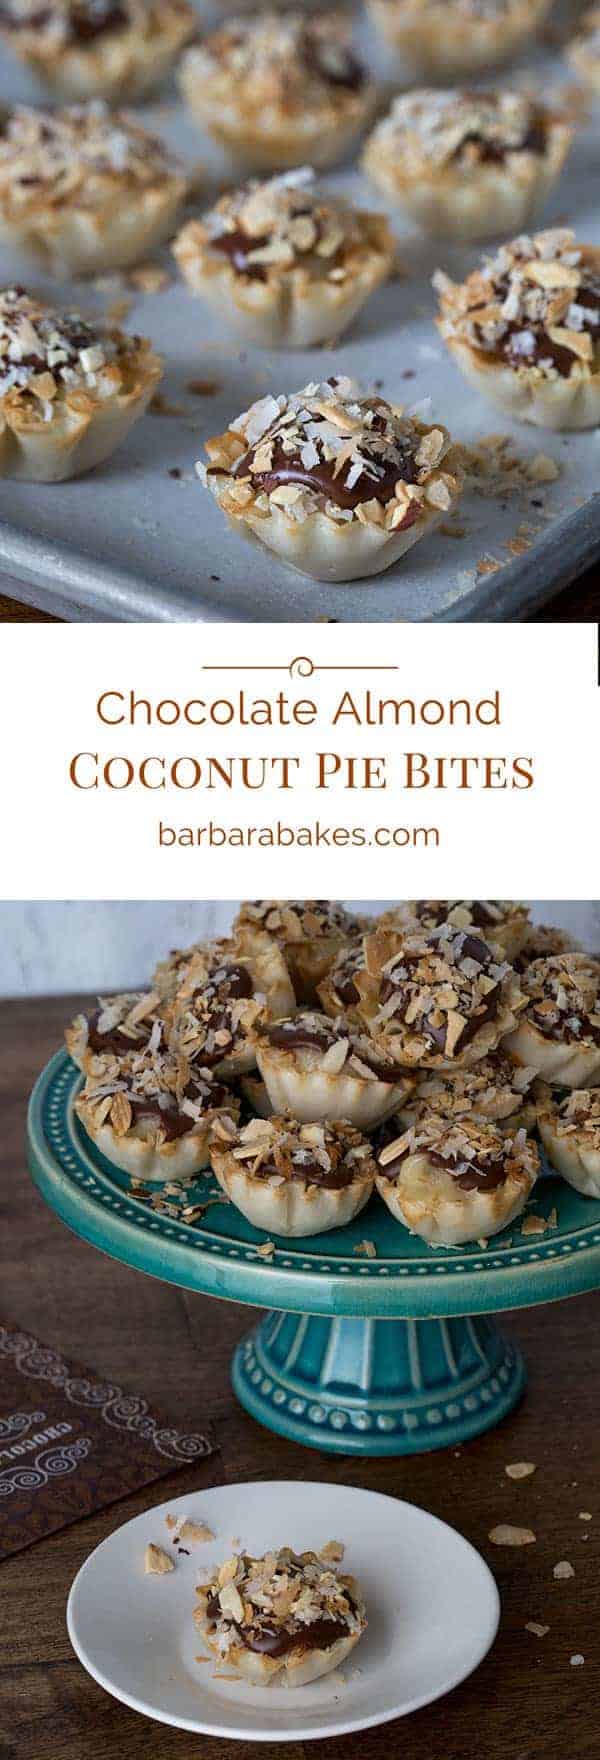 titled photo collage (and shown): Chocolate Almond Coconut Pie Bites